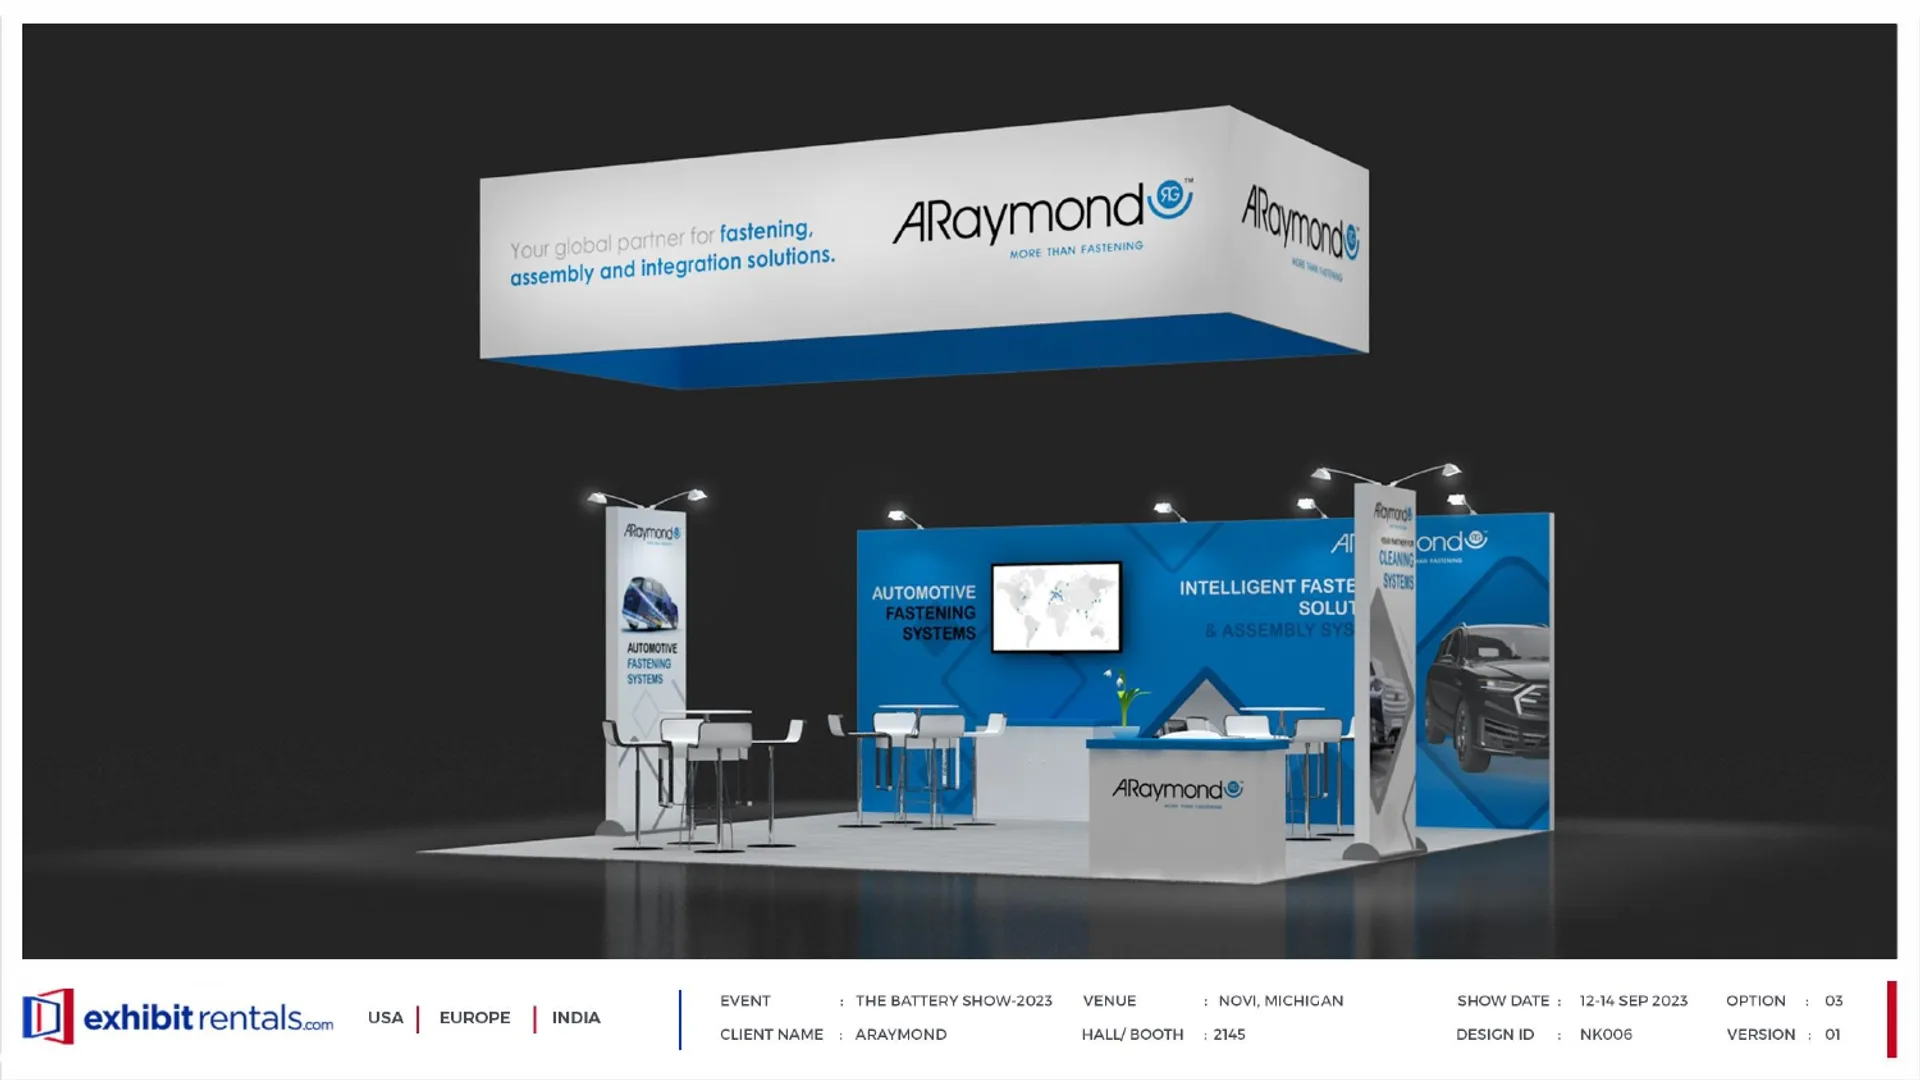 booth-design-projects/Exhibit-Rentals/2024-04-18-20x20-PENINSULA-Project-88/3.1_ARaymond_The Battery Show_ER Design presentation-11_page-0001-gdi7q.jpg